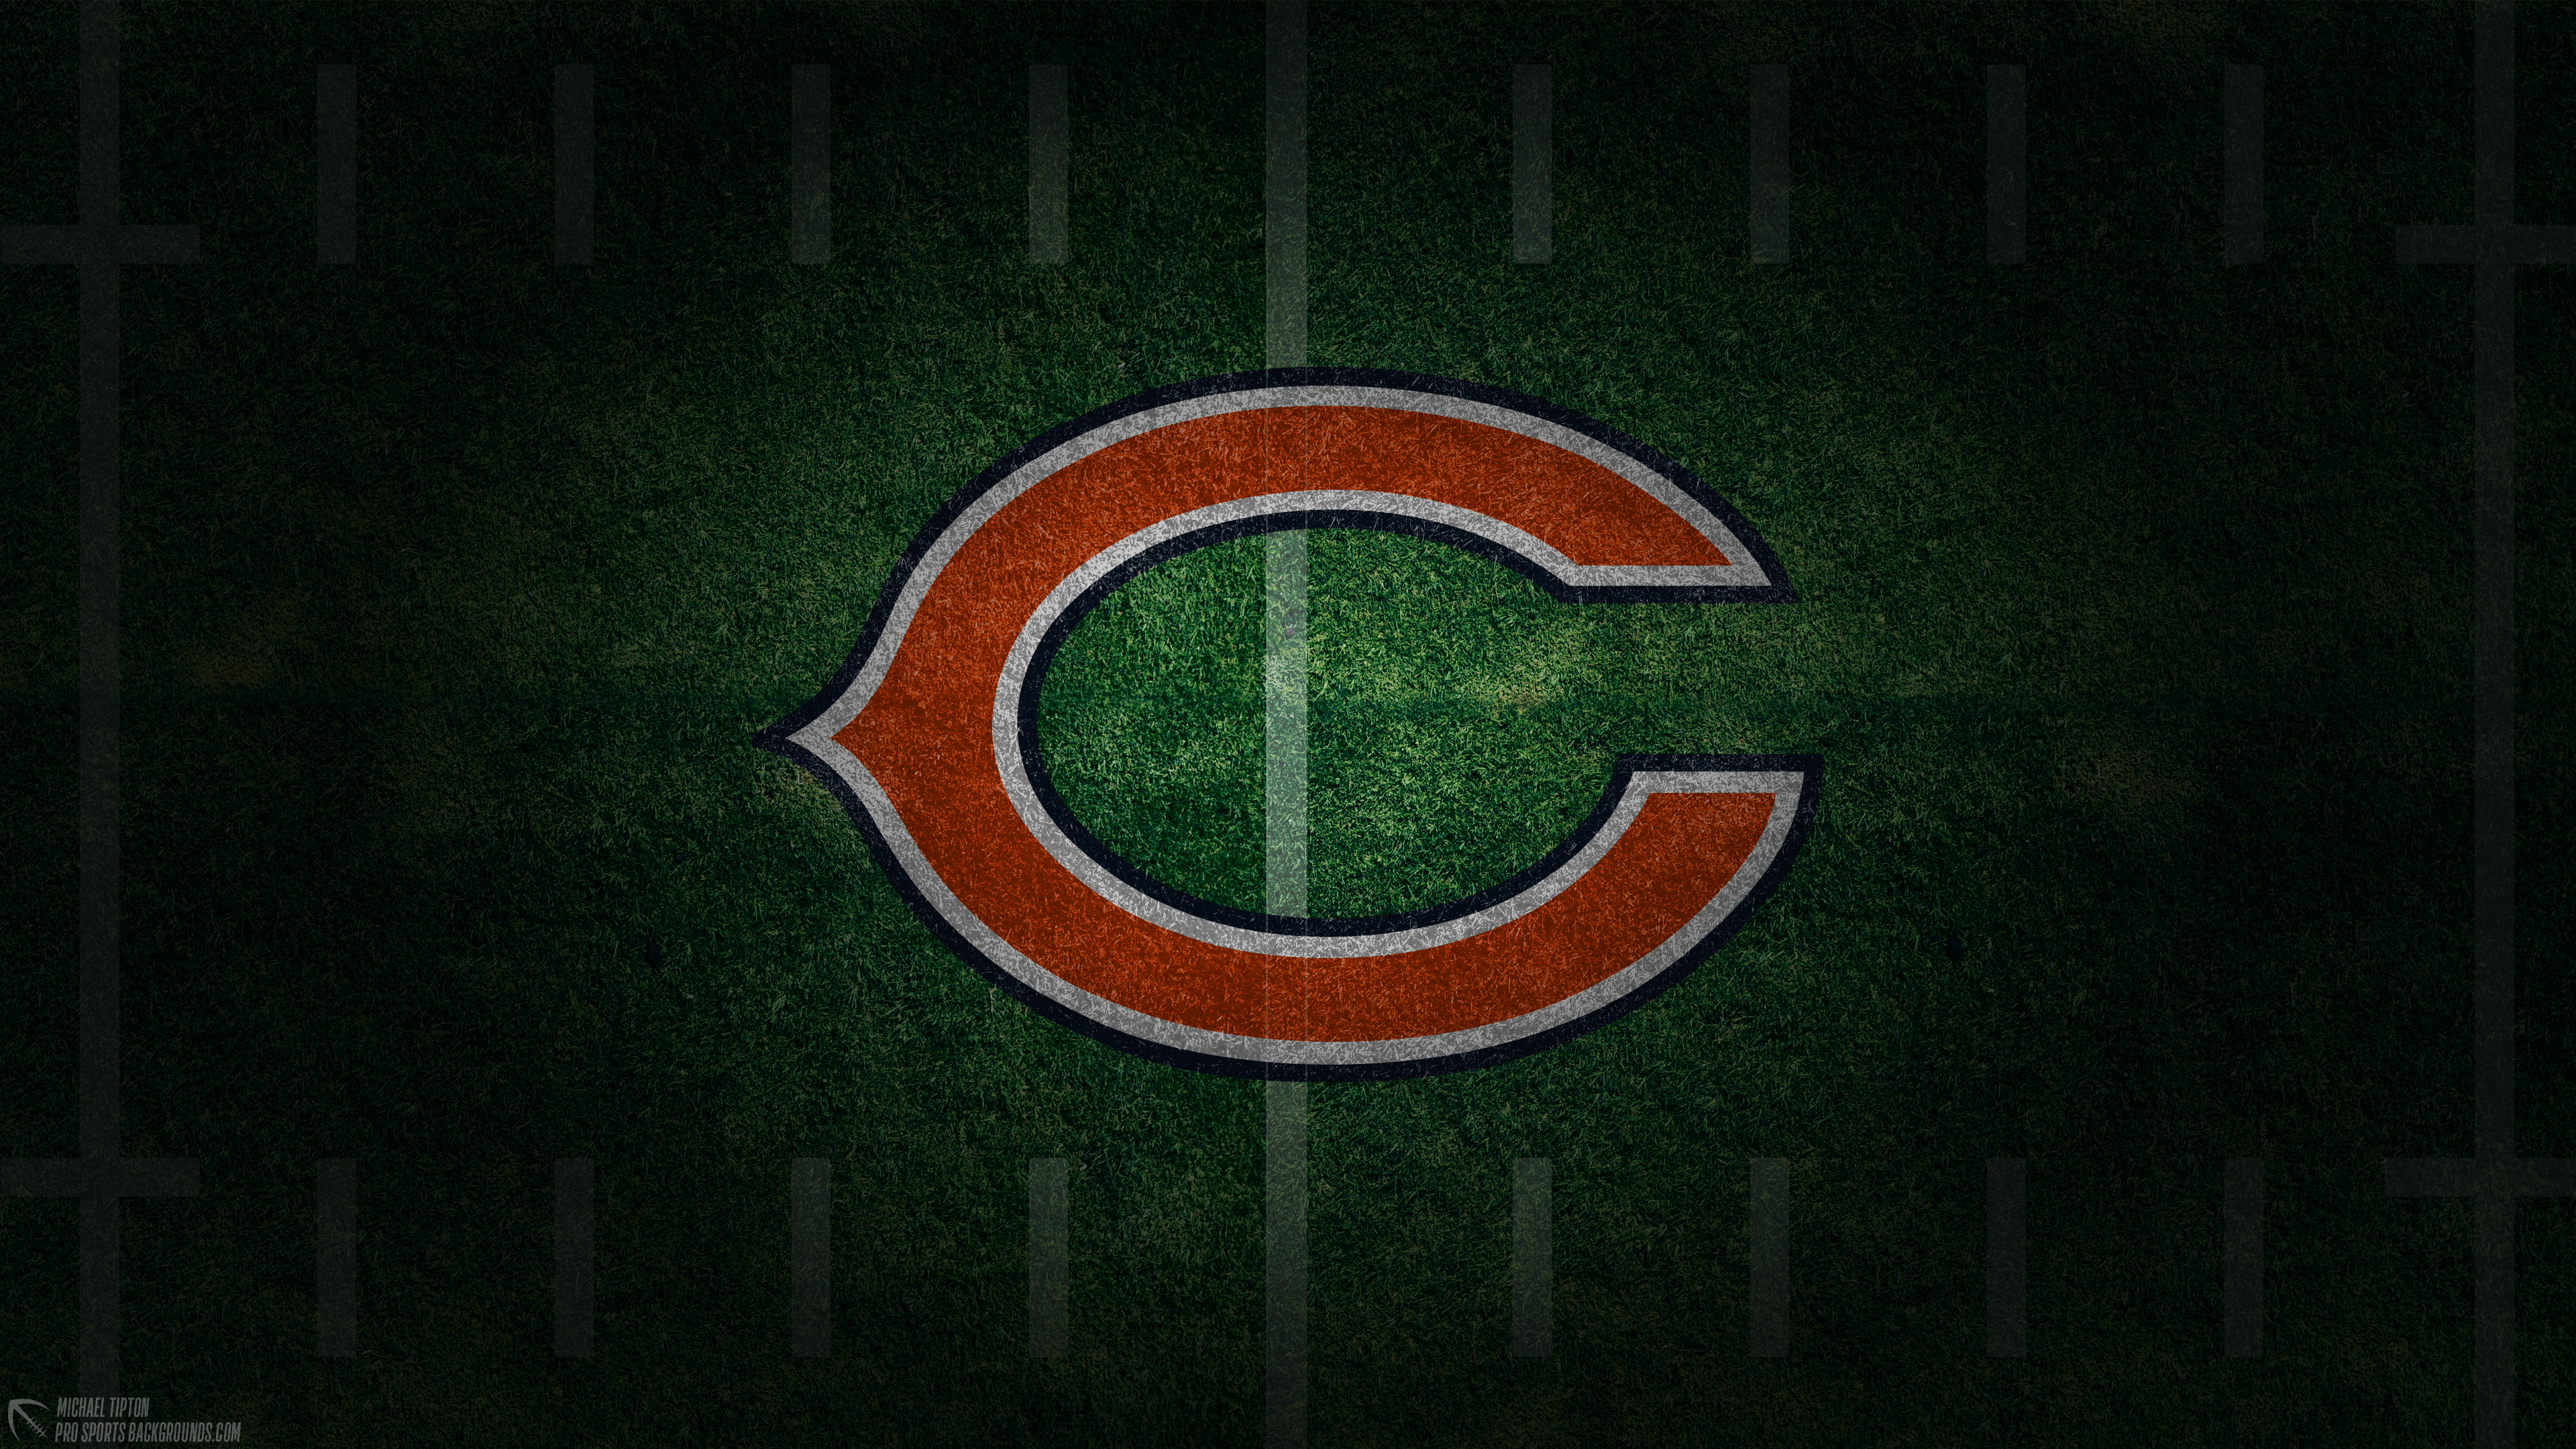 Chicago Bears 2022 Wallpapers - Wallpaper Cave